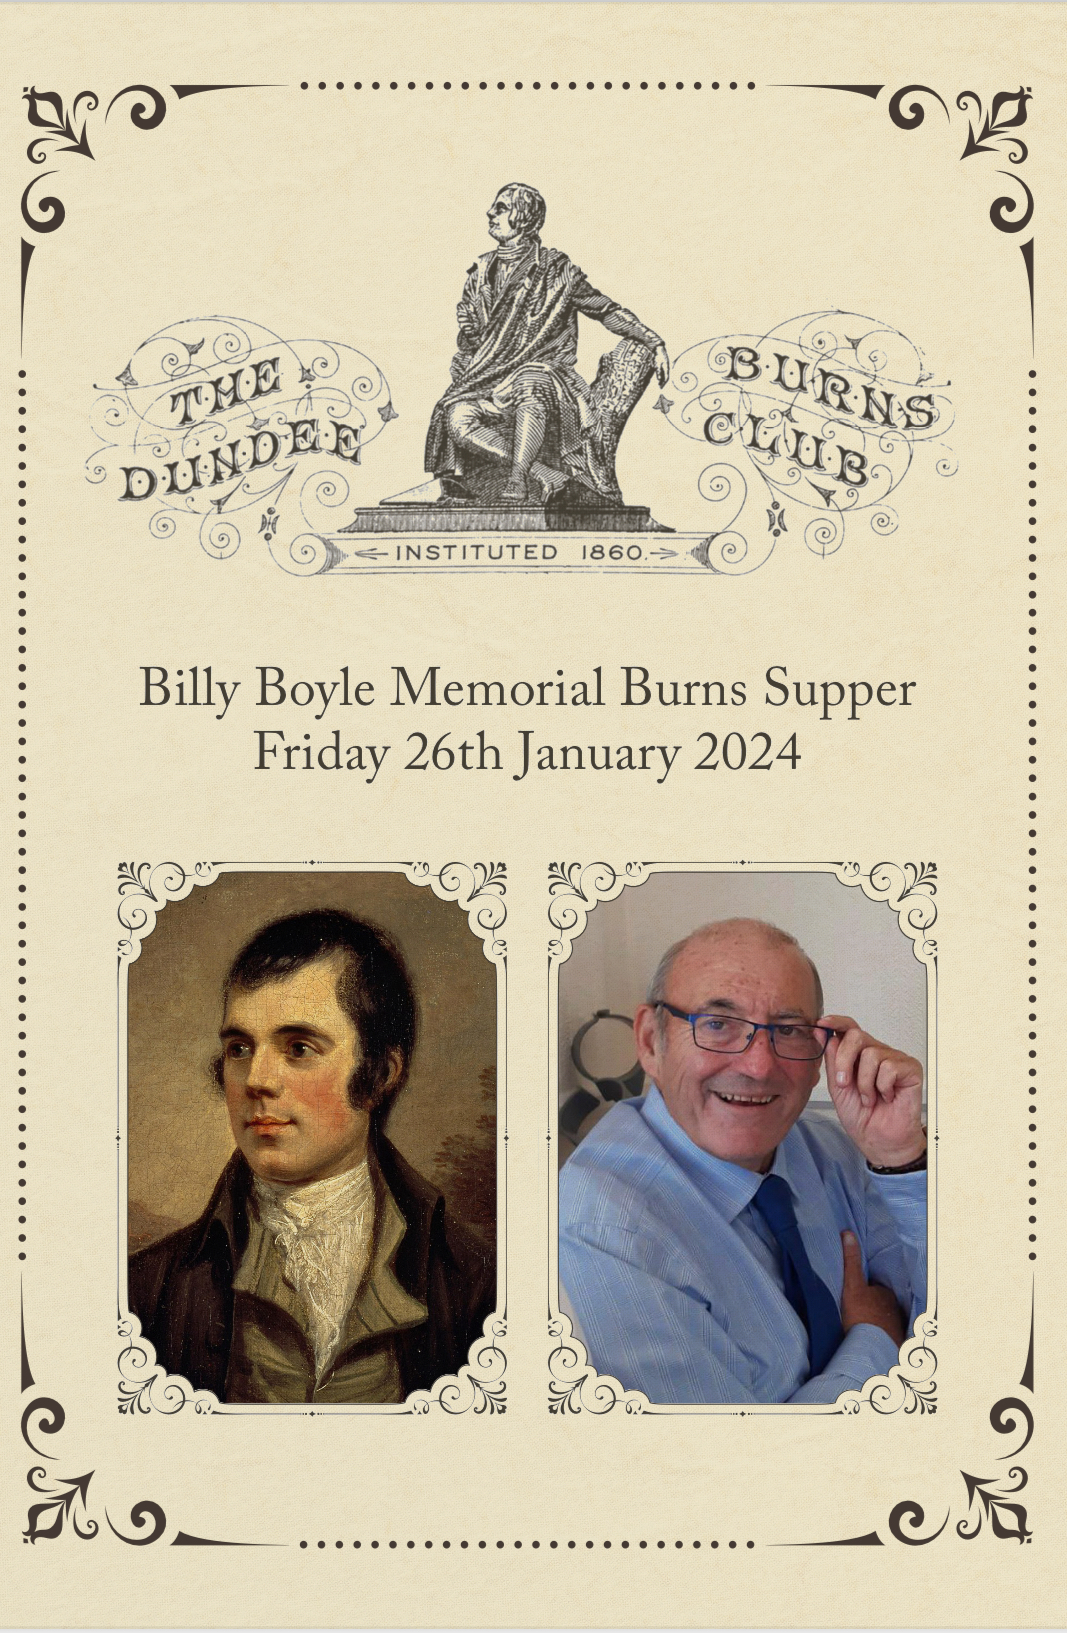 Memorial Burns Supper for Billy Boyle sells out